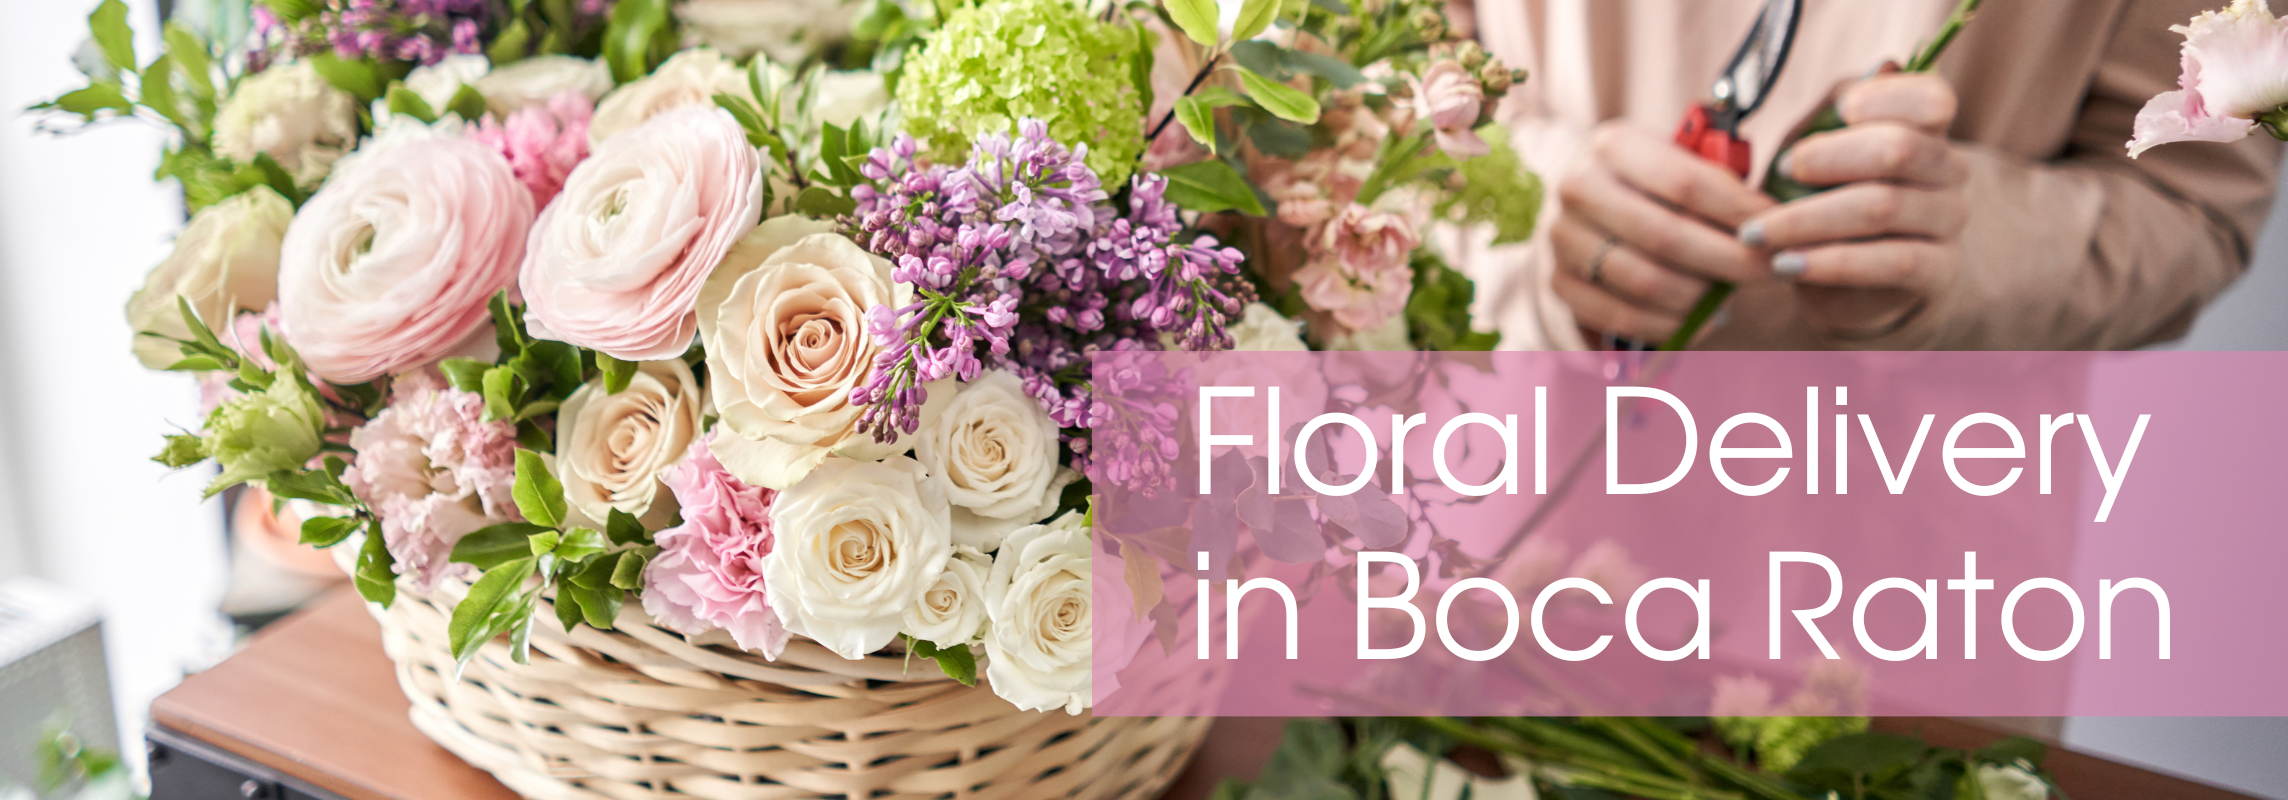 floral delivery in Boca Raton